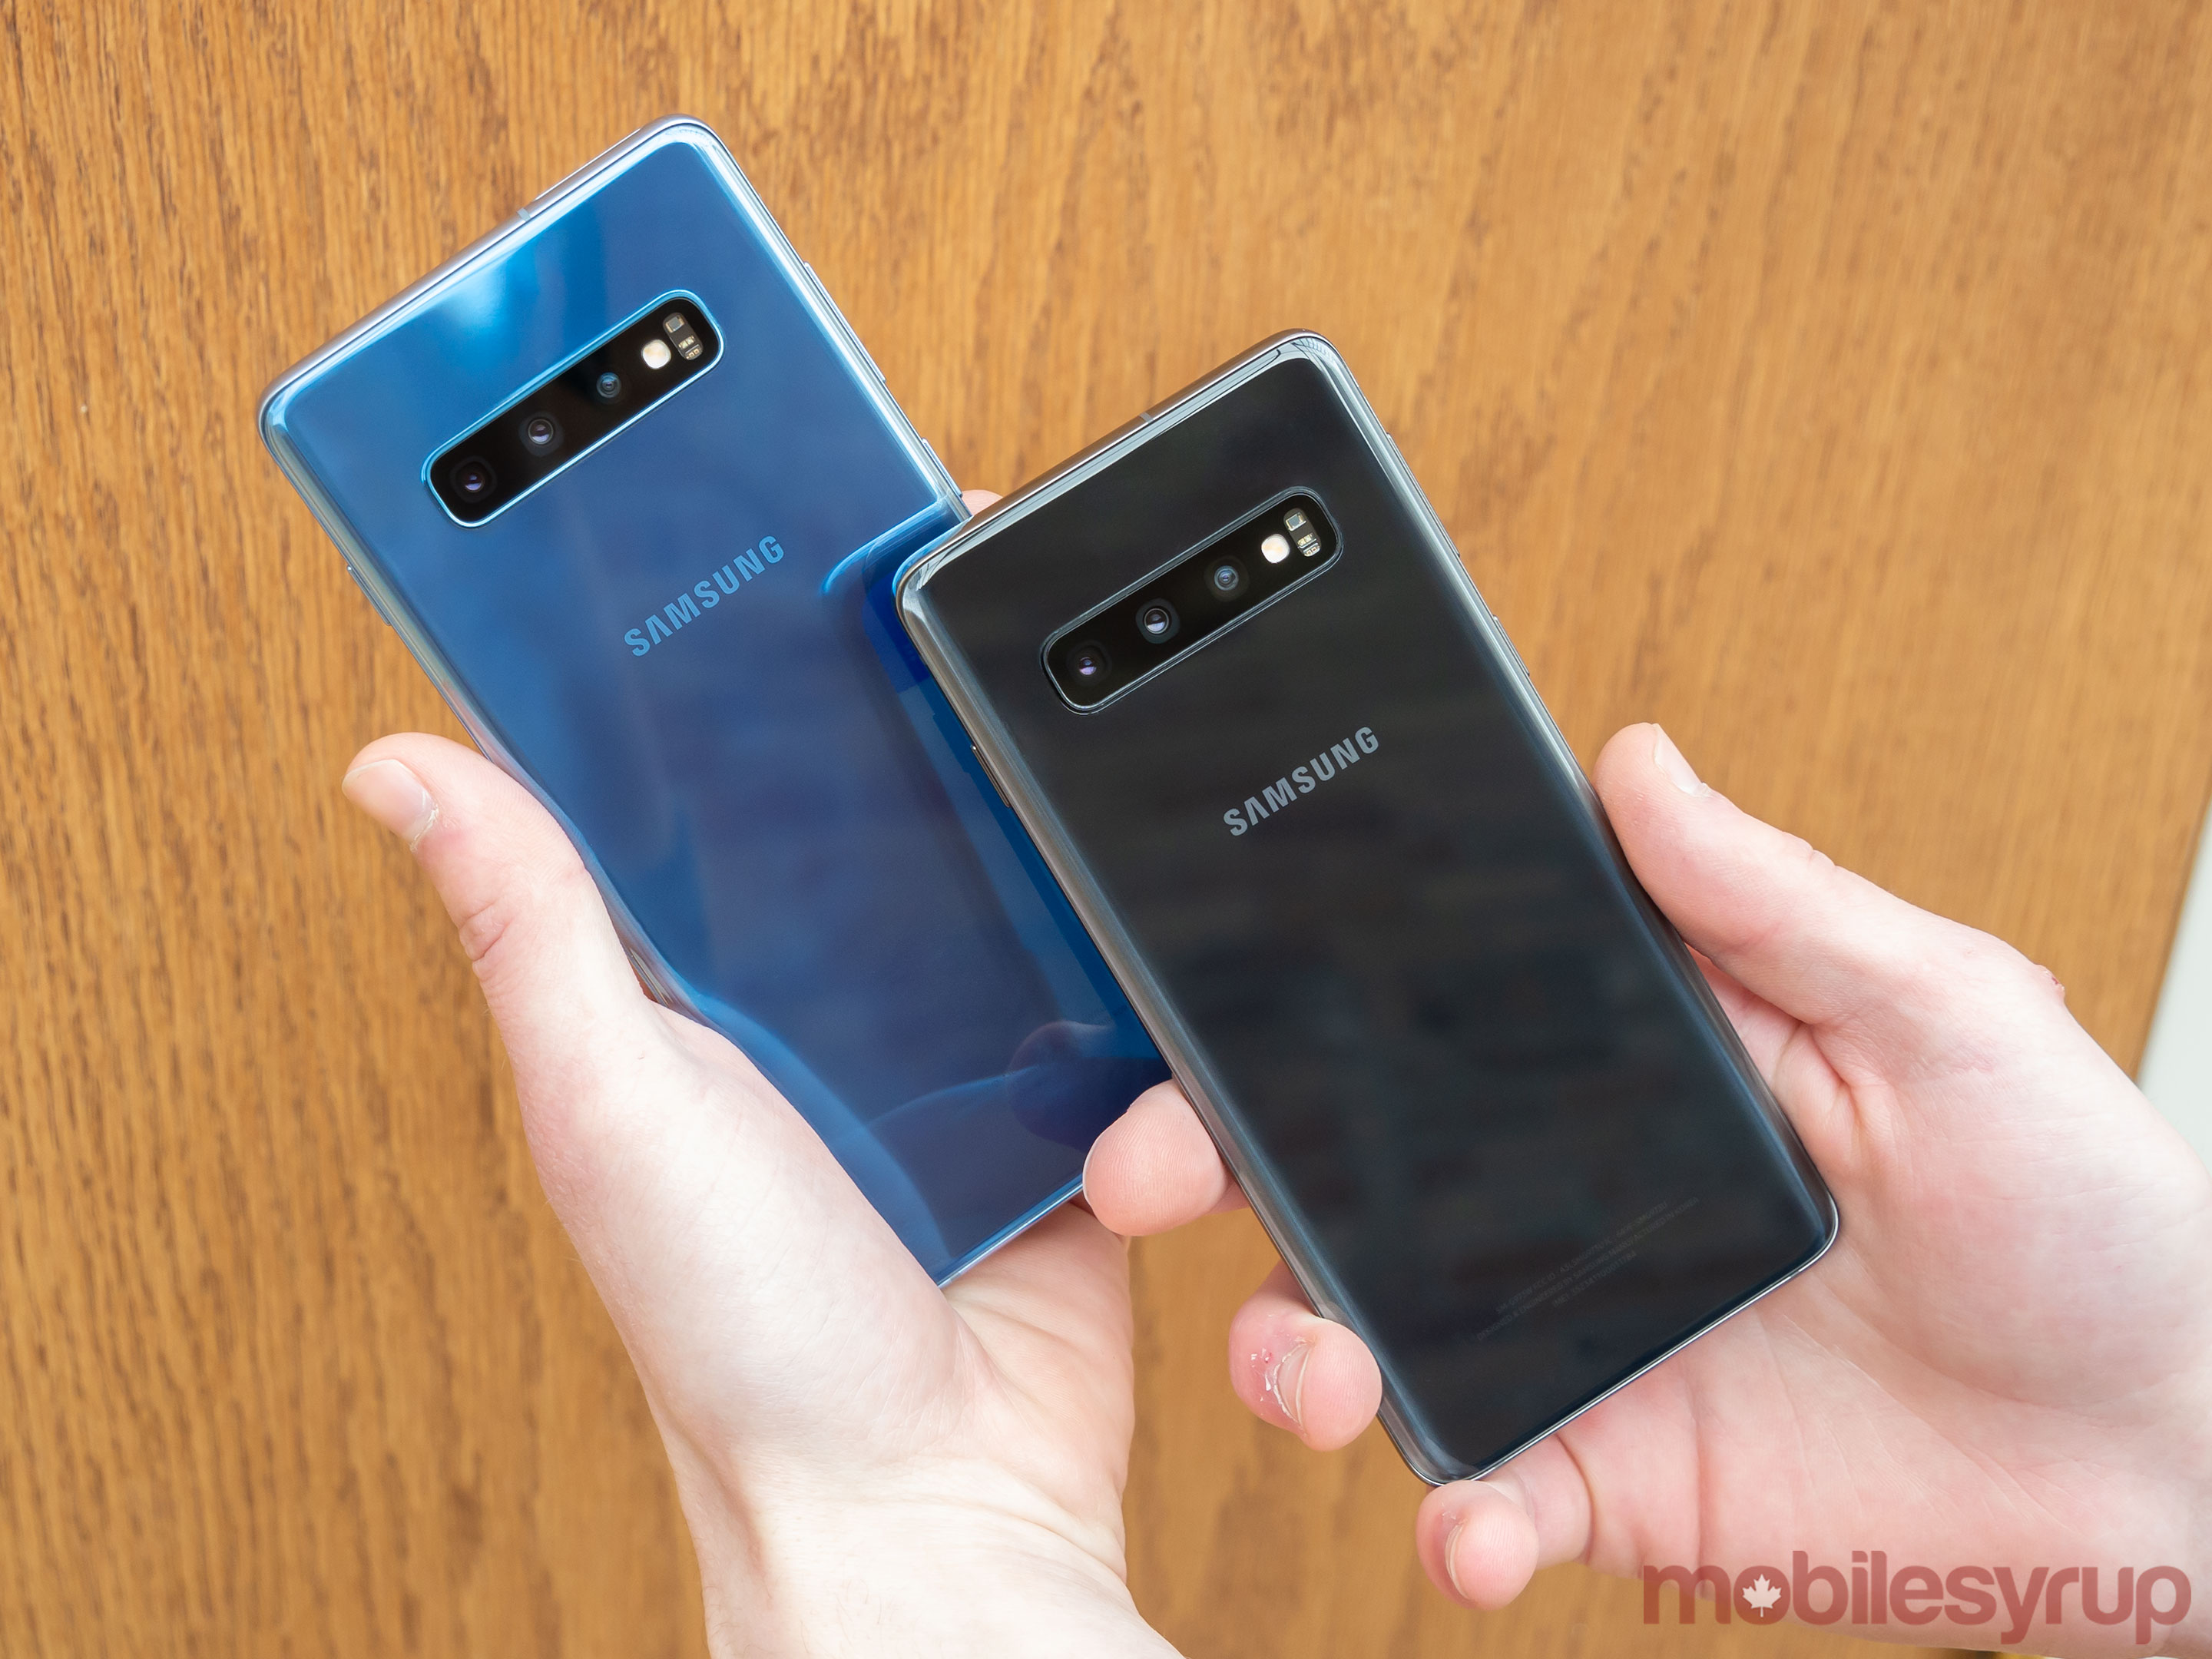 Back of the S10 and S10+